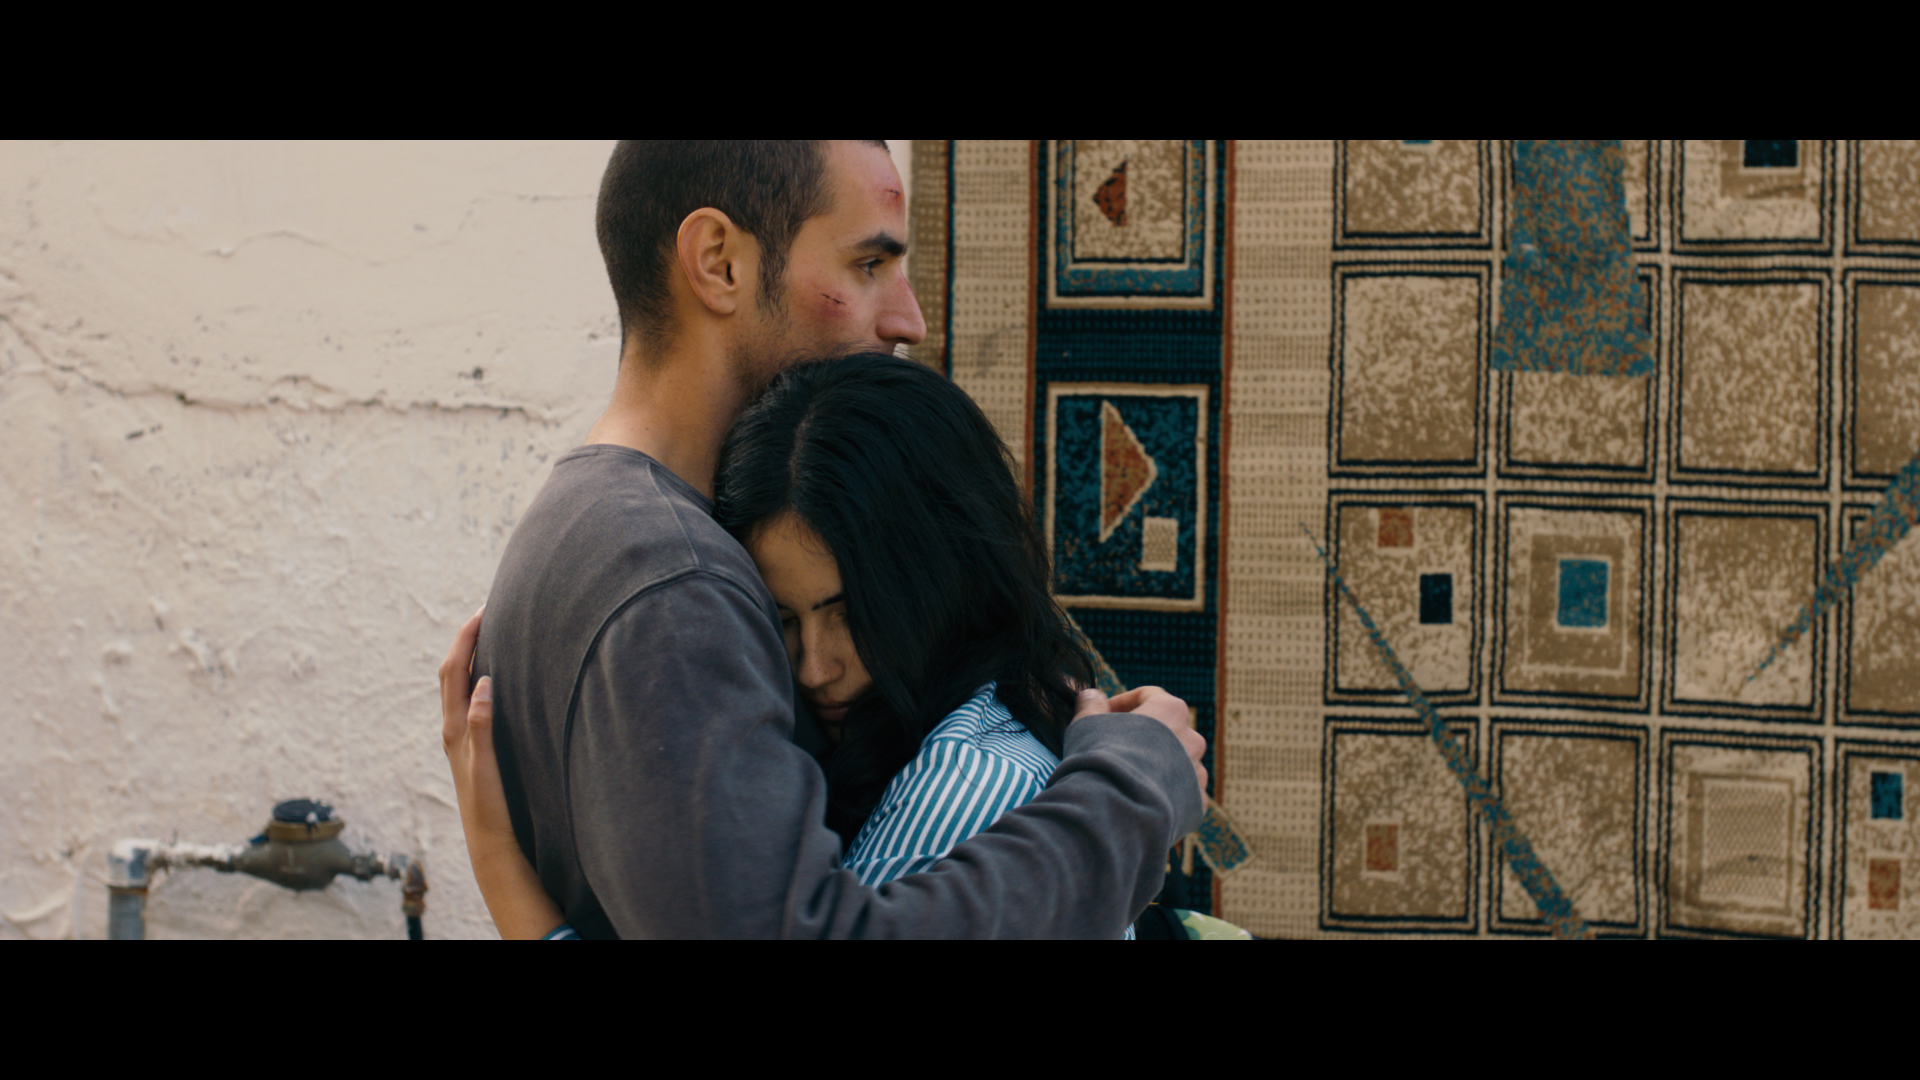 Love without barriers? Omar (Bakri) and Nadia (Lubany).Adopt Films